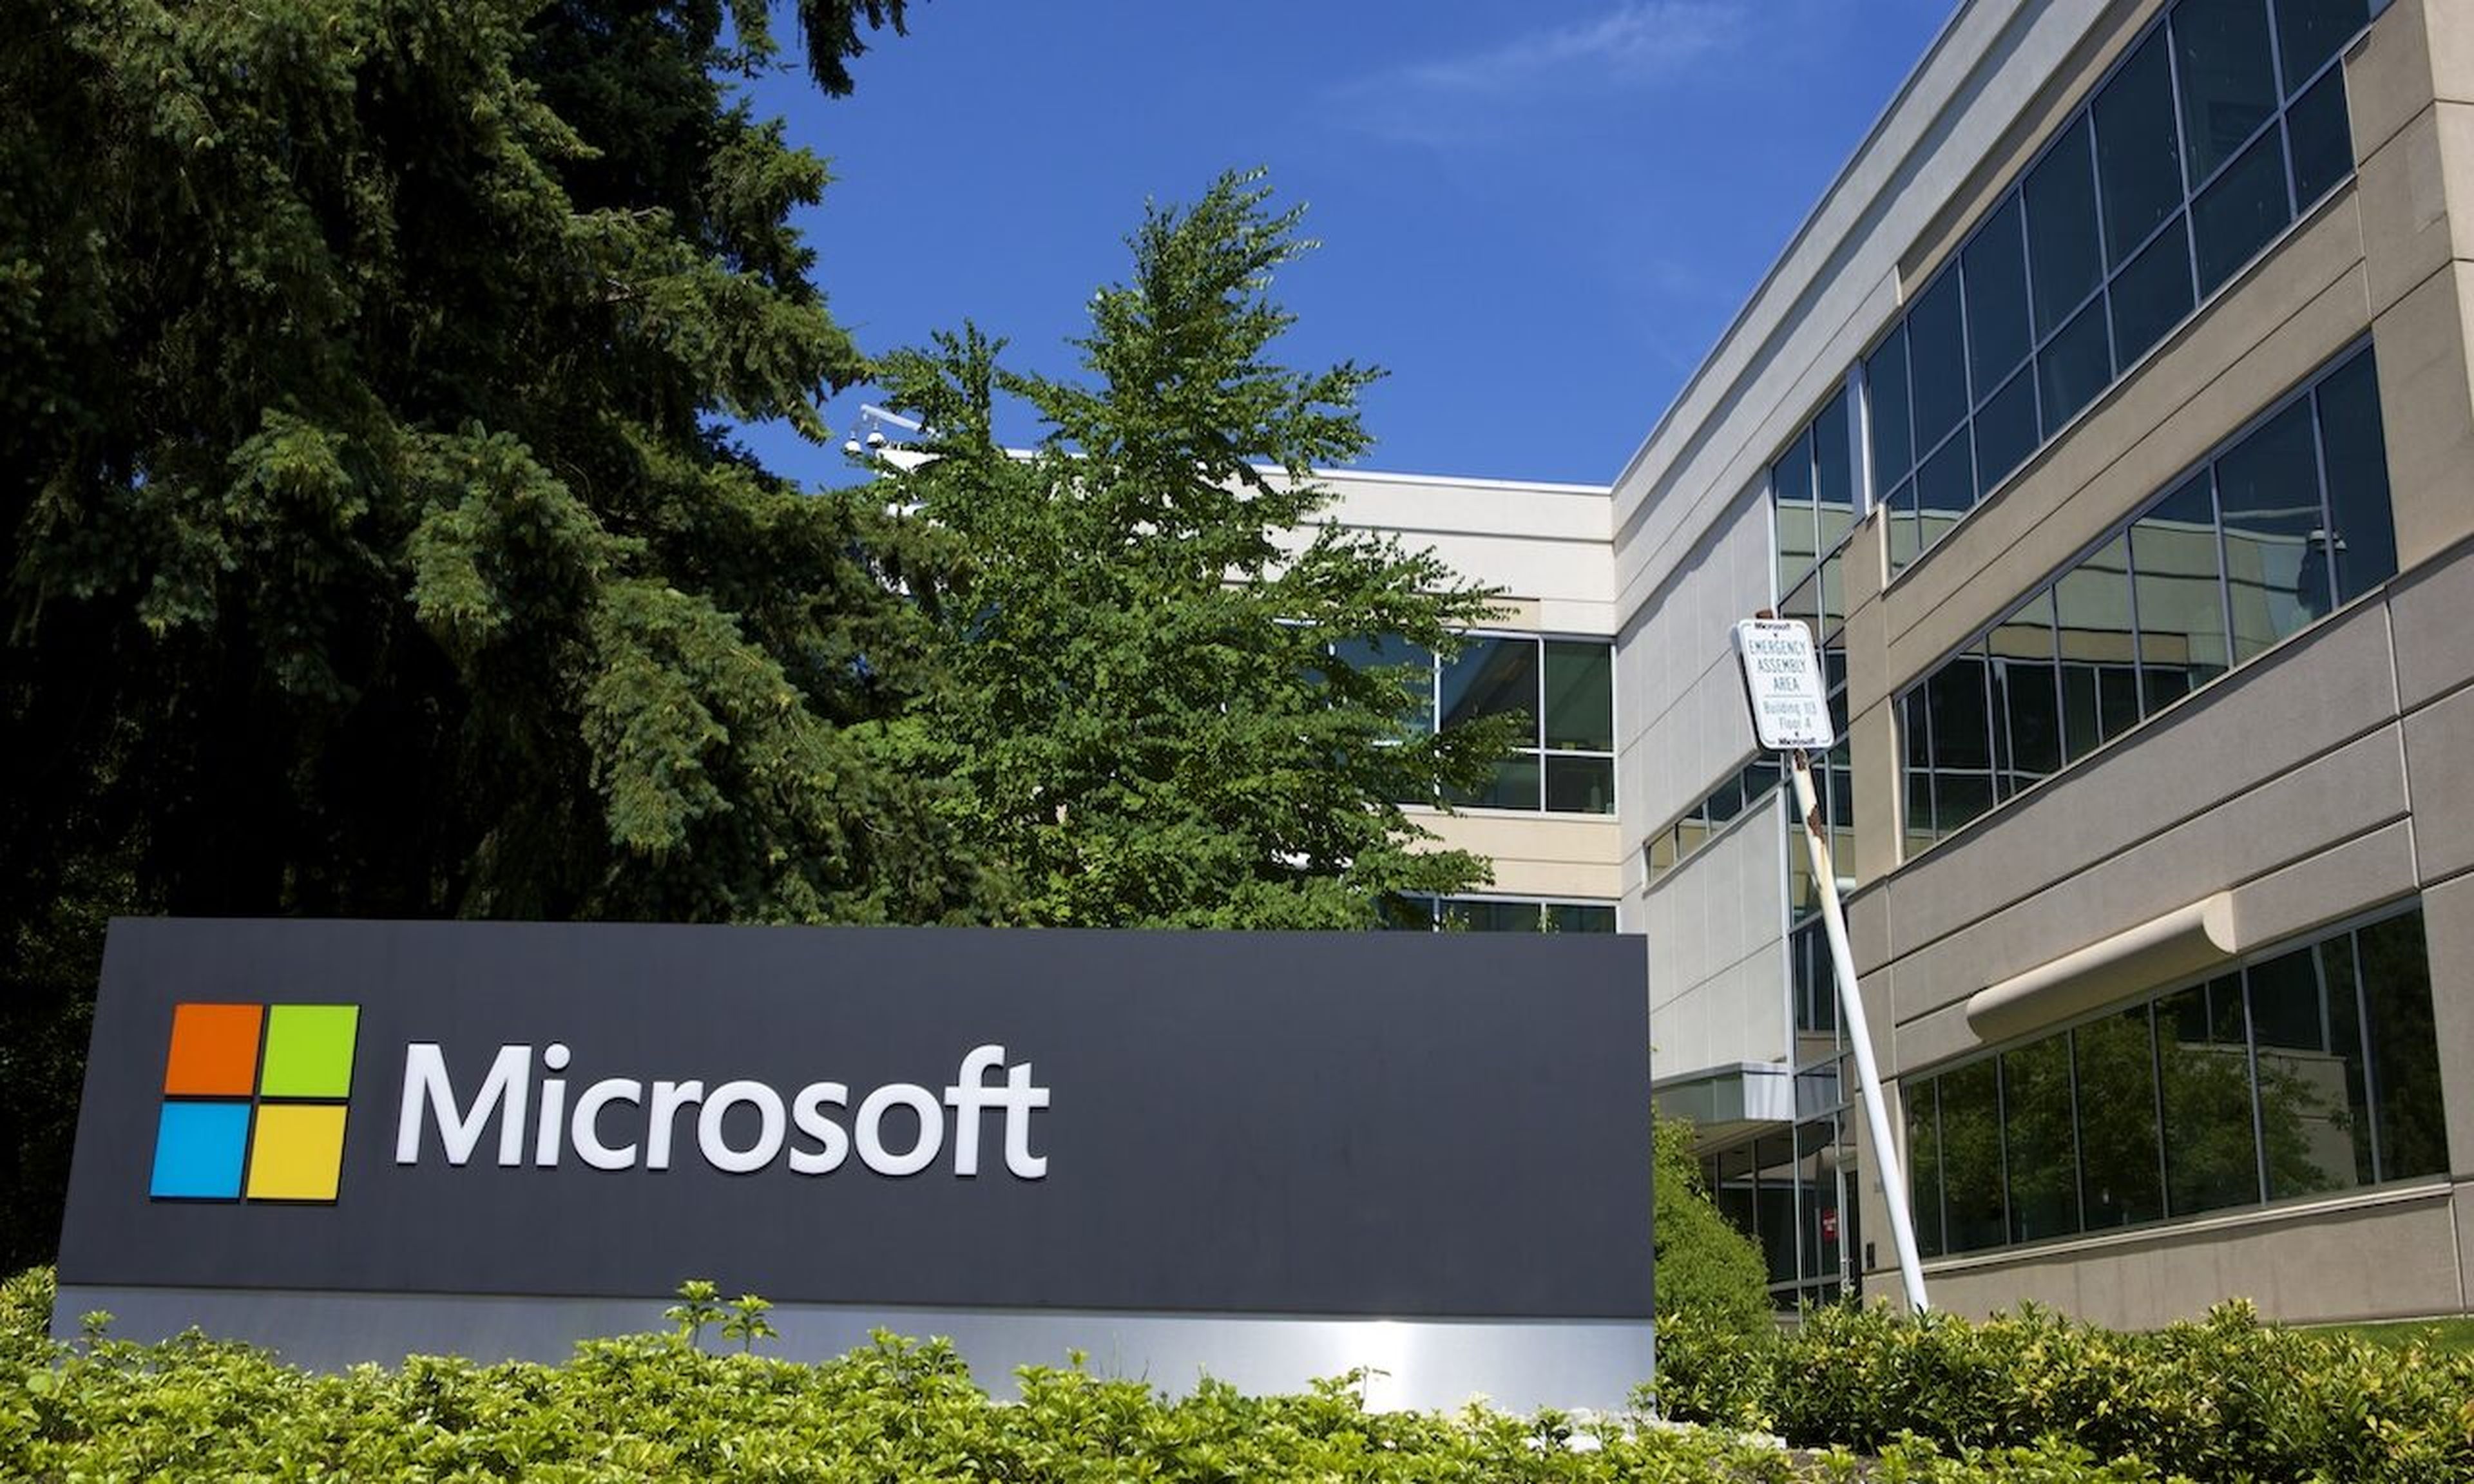 A building on the Microsoft Headquarters campus in Redmond, Wash. Researchers recently found a security flaw in the Microsoft Azure App Service that was promptly mitigated. (Stephen Brashear/Getty Images)